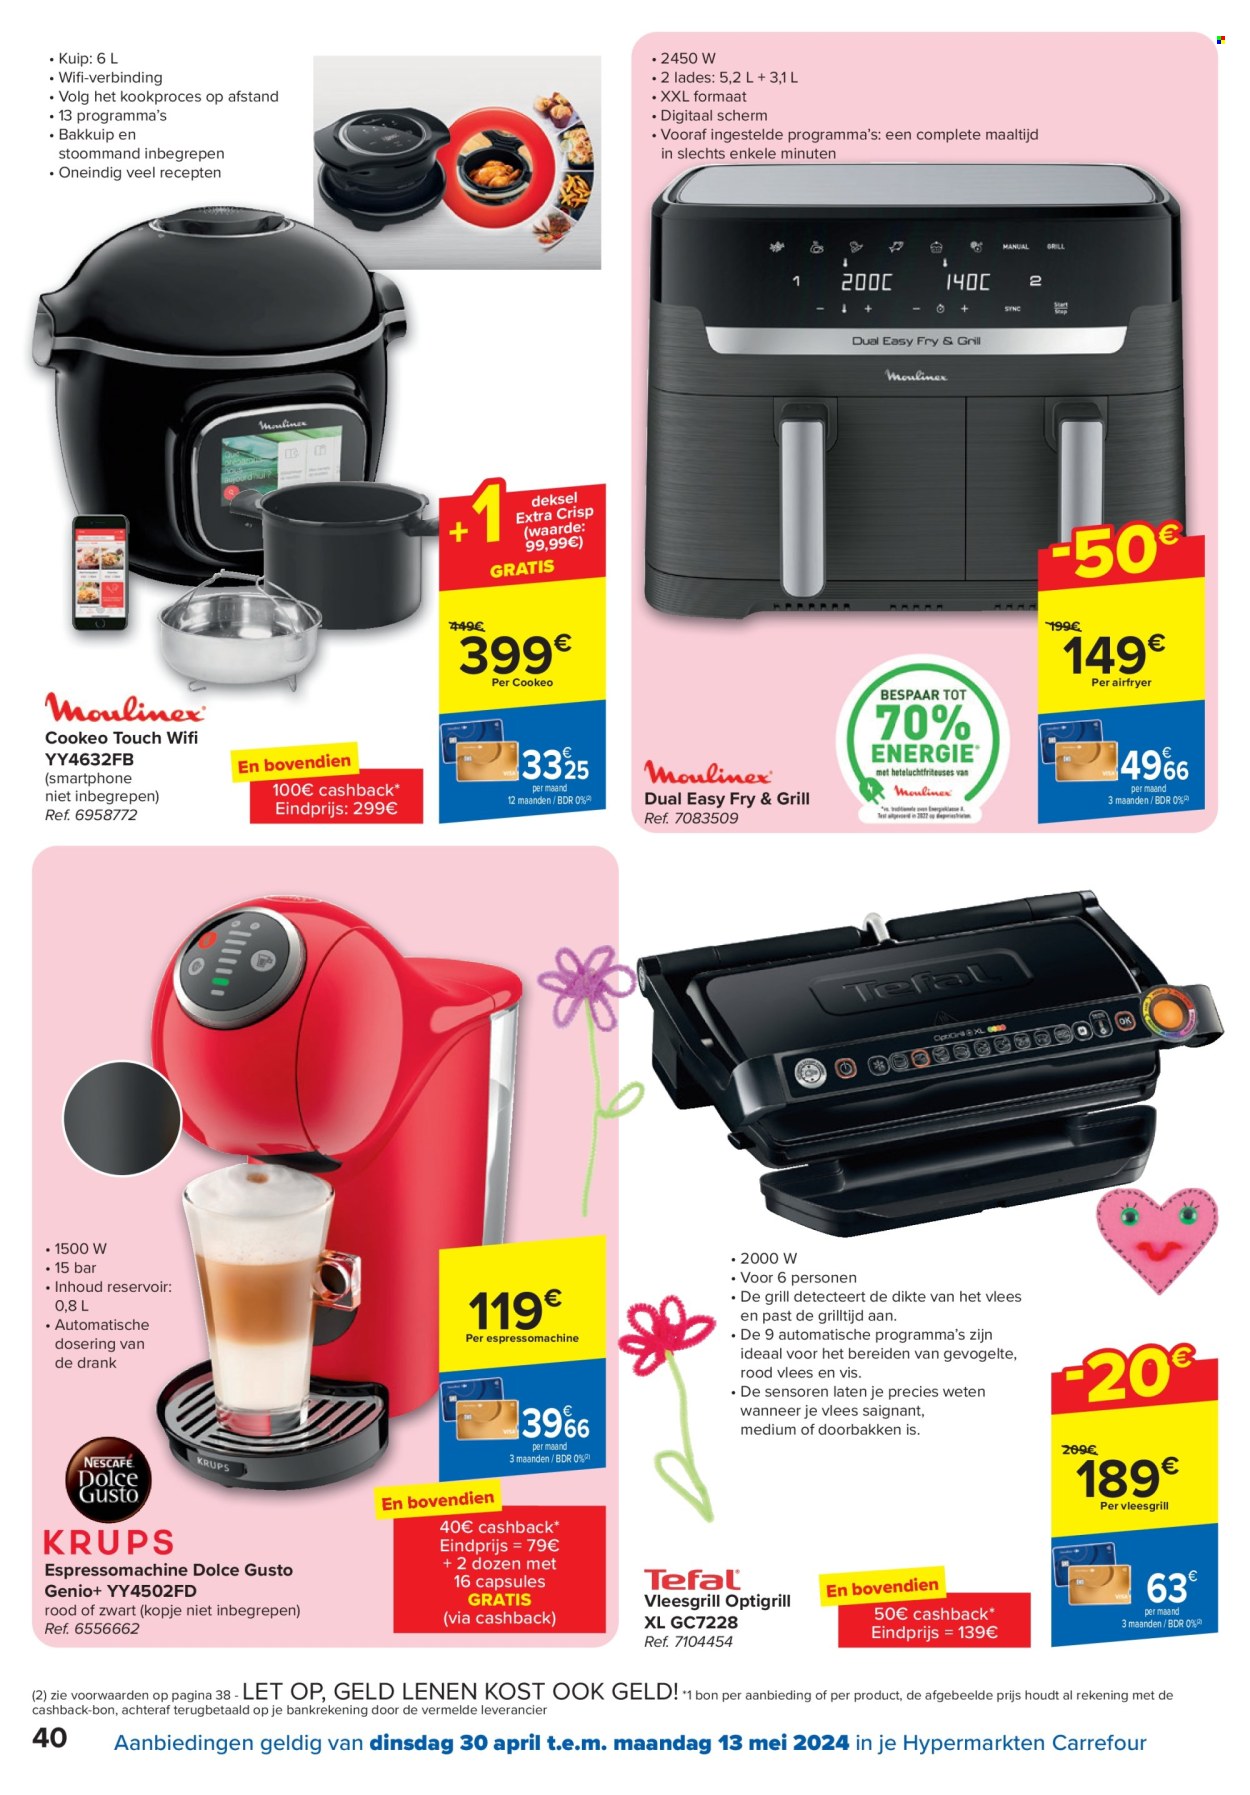 thumbnail - Carrefour hypermarkt-aanbieding - 30/04/2024 - 13/05/2024 -  producten in de aanbieding - Dolce Gusto, smartphone, wifi, espressomachine, airfryer, Optigrill, contactgrill, grill. Pagina 40.